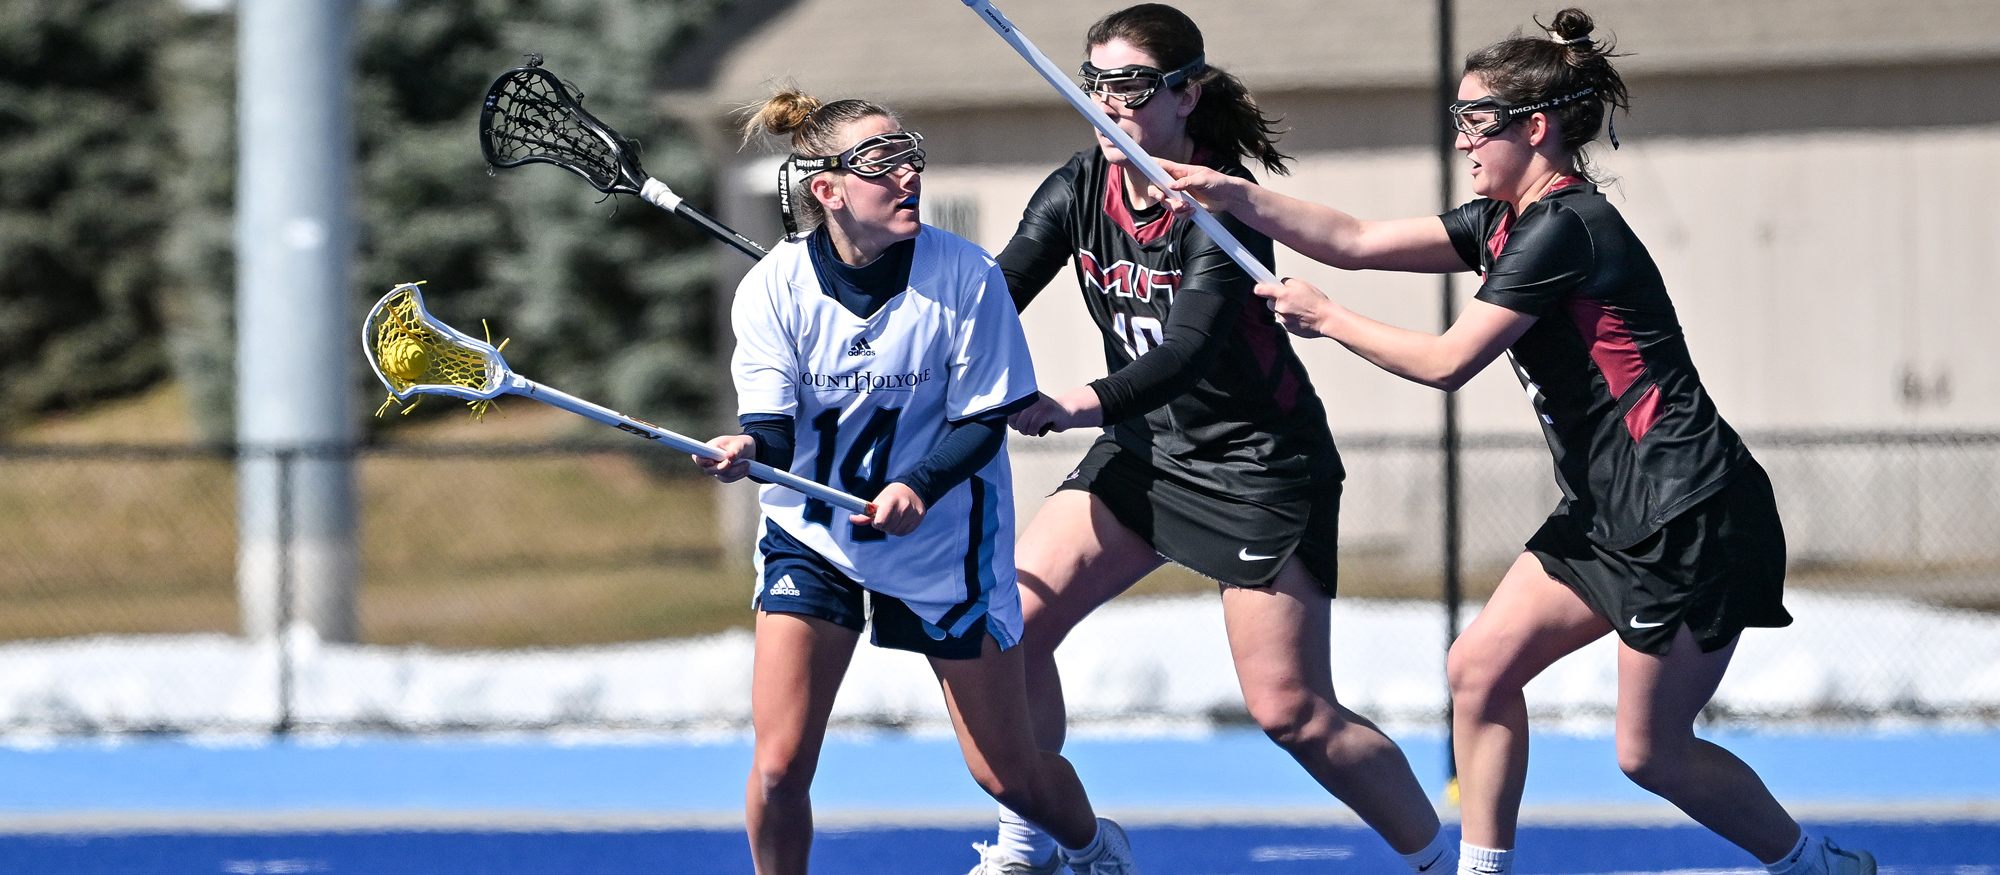 Mount Holyoke first-year midfielder Emi Bisson faces double coverage against MIT's defense in the Lyons' NEWMAC opener on March 18, 2023. (Bob Blanchard/RJB Sports)